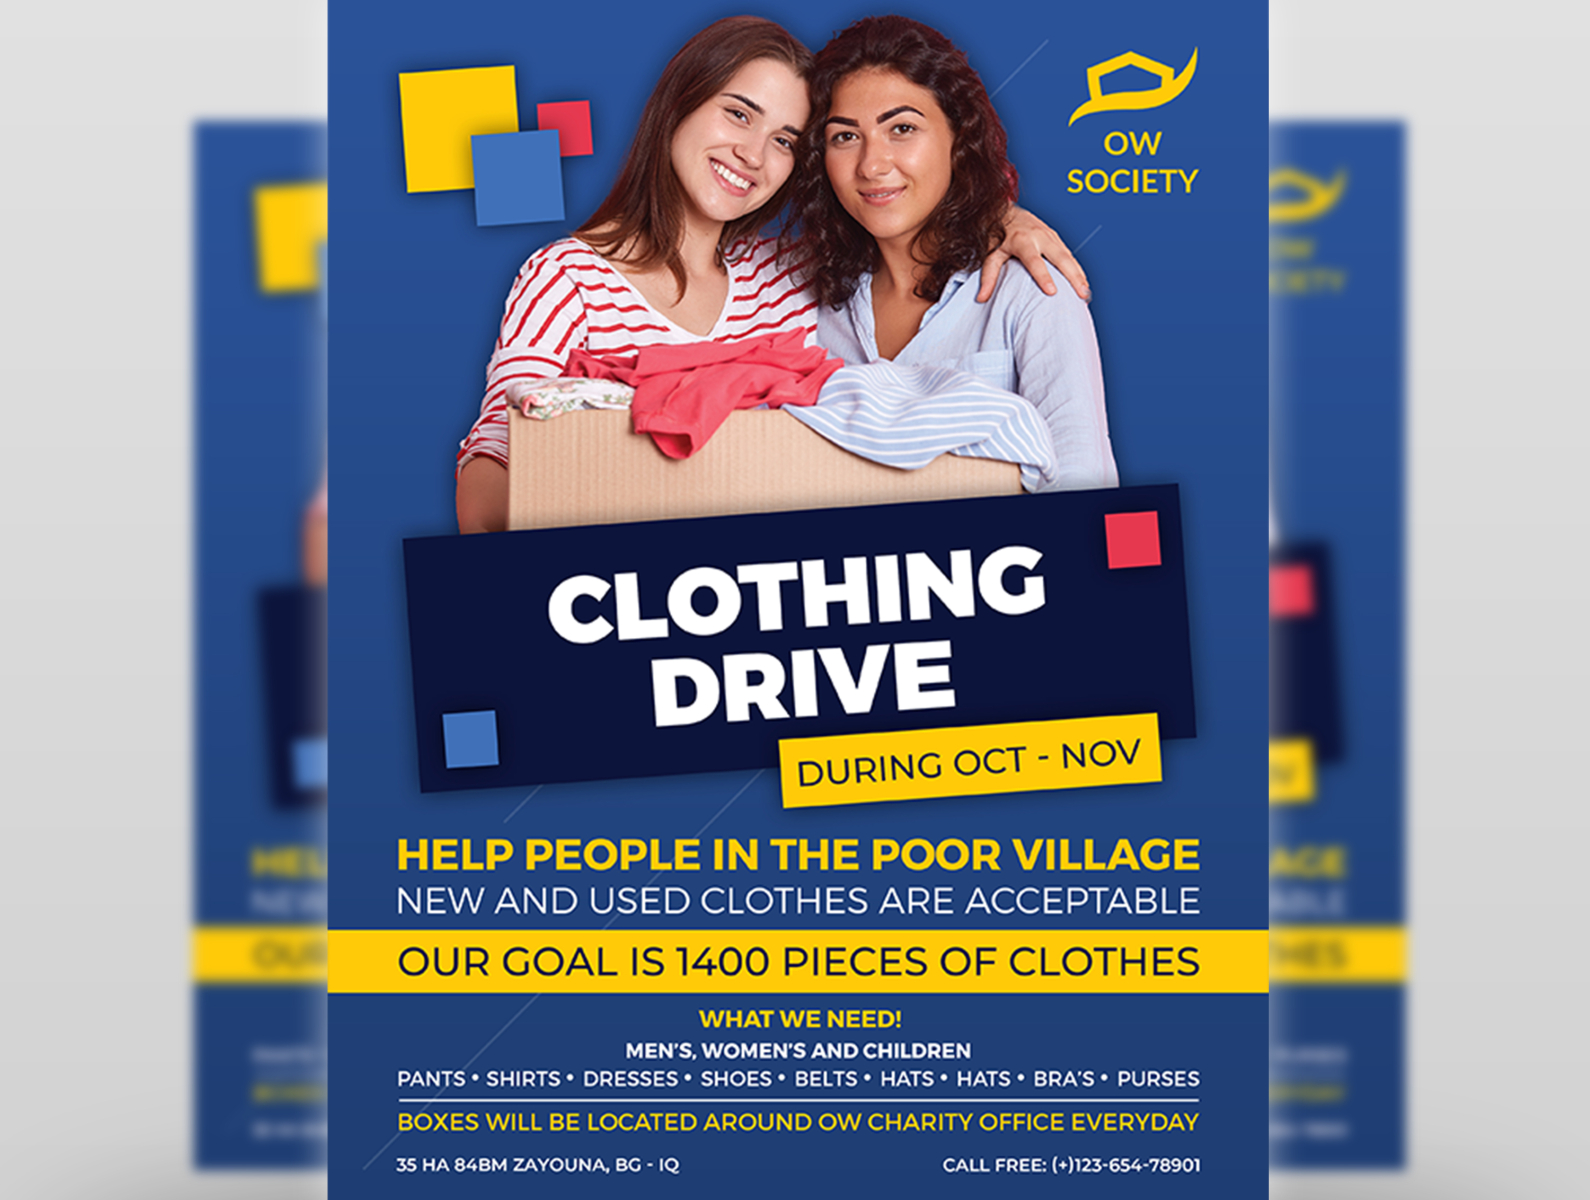 Homeless Clothing Drive Flyer Template by OWPictures on Dribbble With Clothing Drive Flyer Template